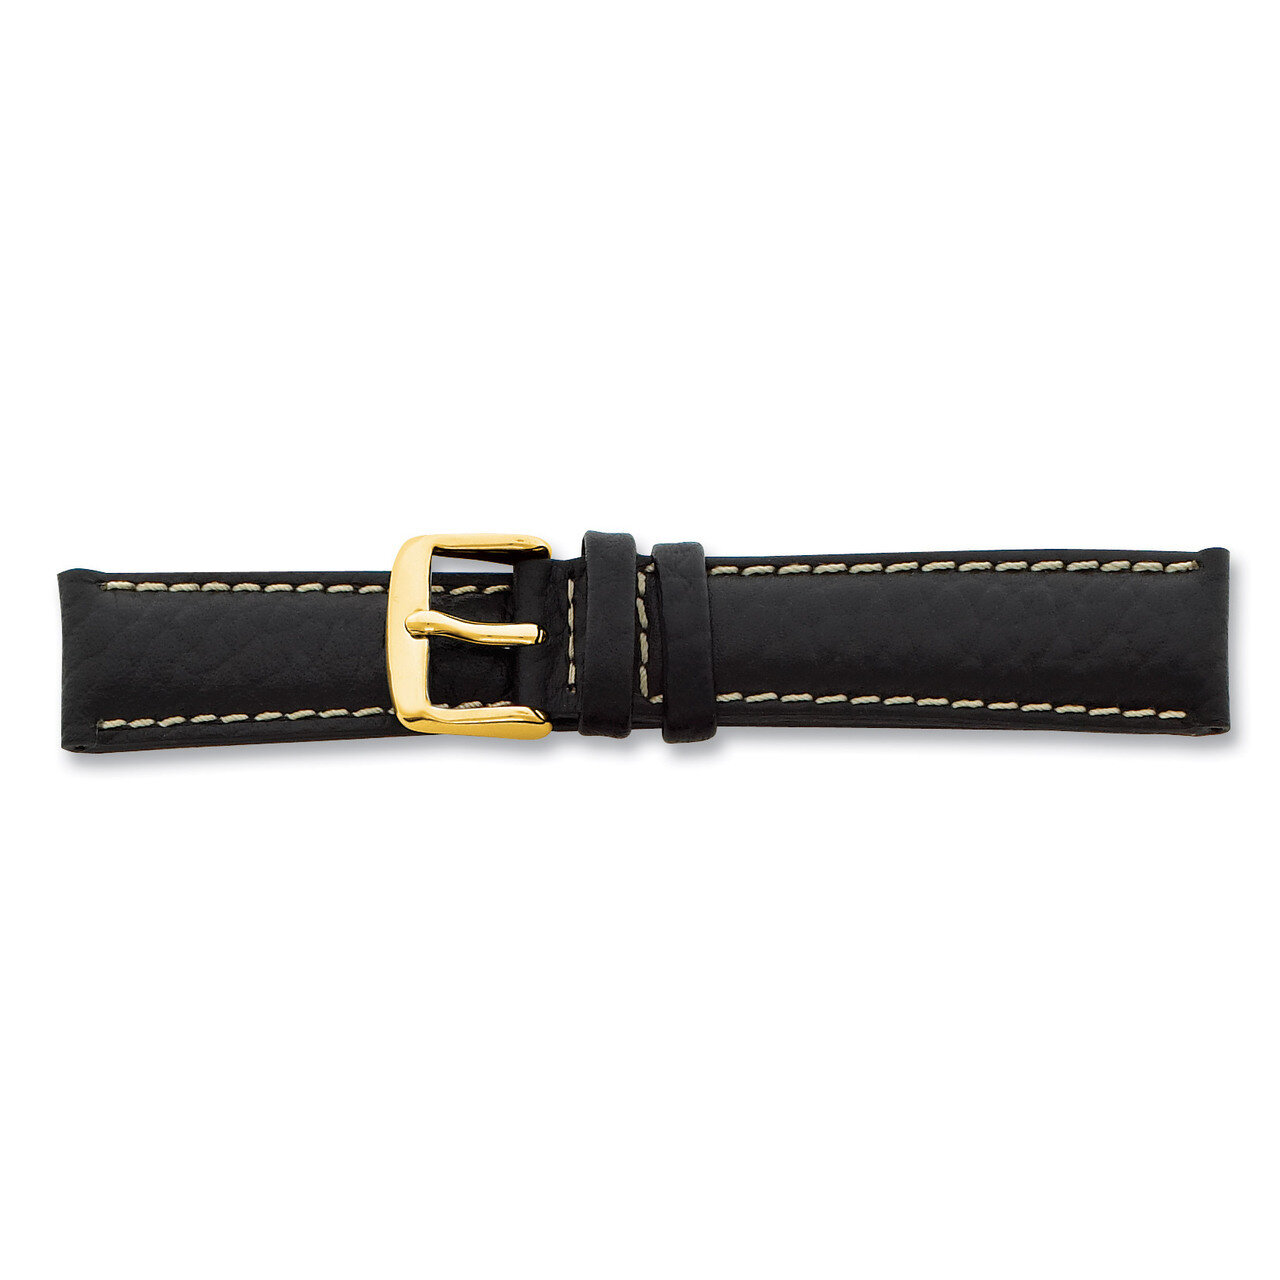 19mm Long Black Leather White Stitch Buckle Watch Band 8.5 Inch Gold-tone BAY99L-19